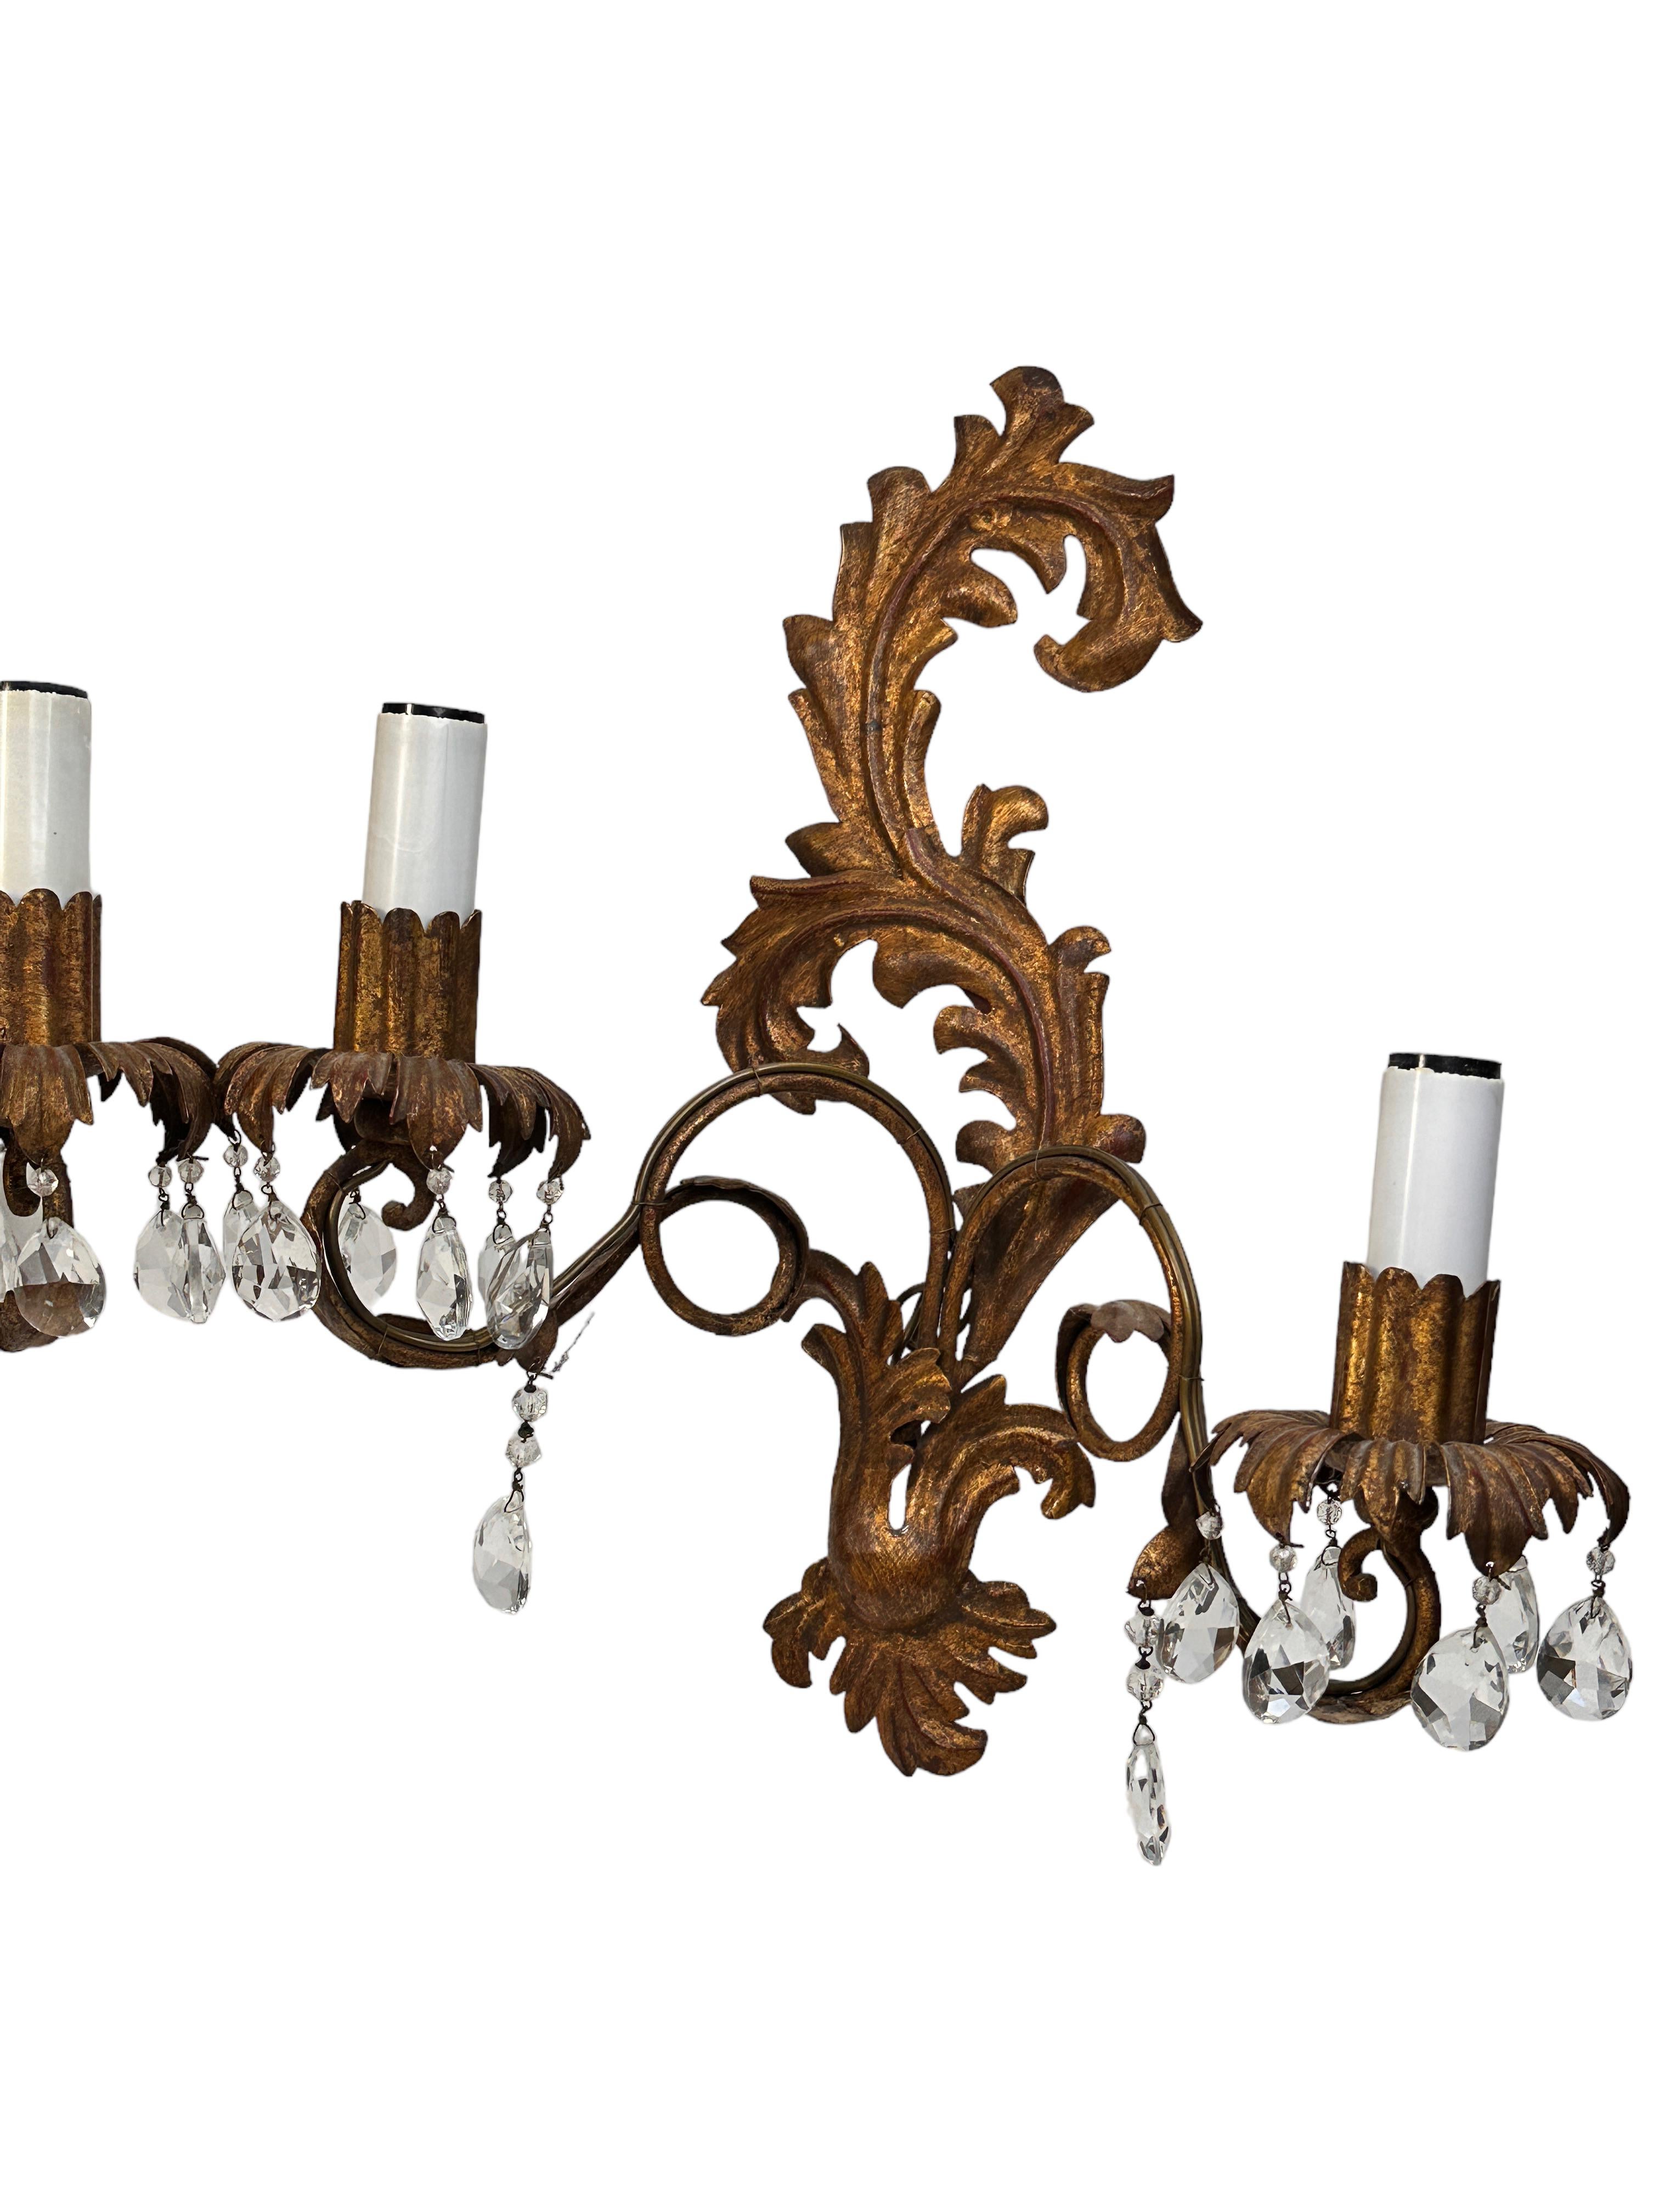 Hollywood Regency Pair of Crystal Gilt Leaf & Crystal Wall Sconces by Banci Florence, Italy, 1950s For Sale